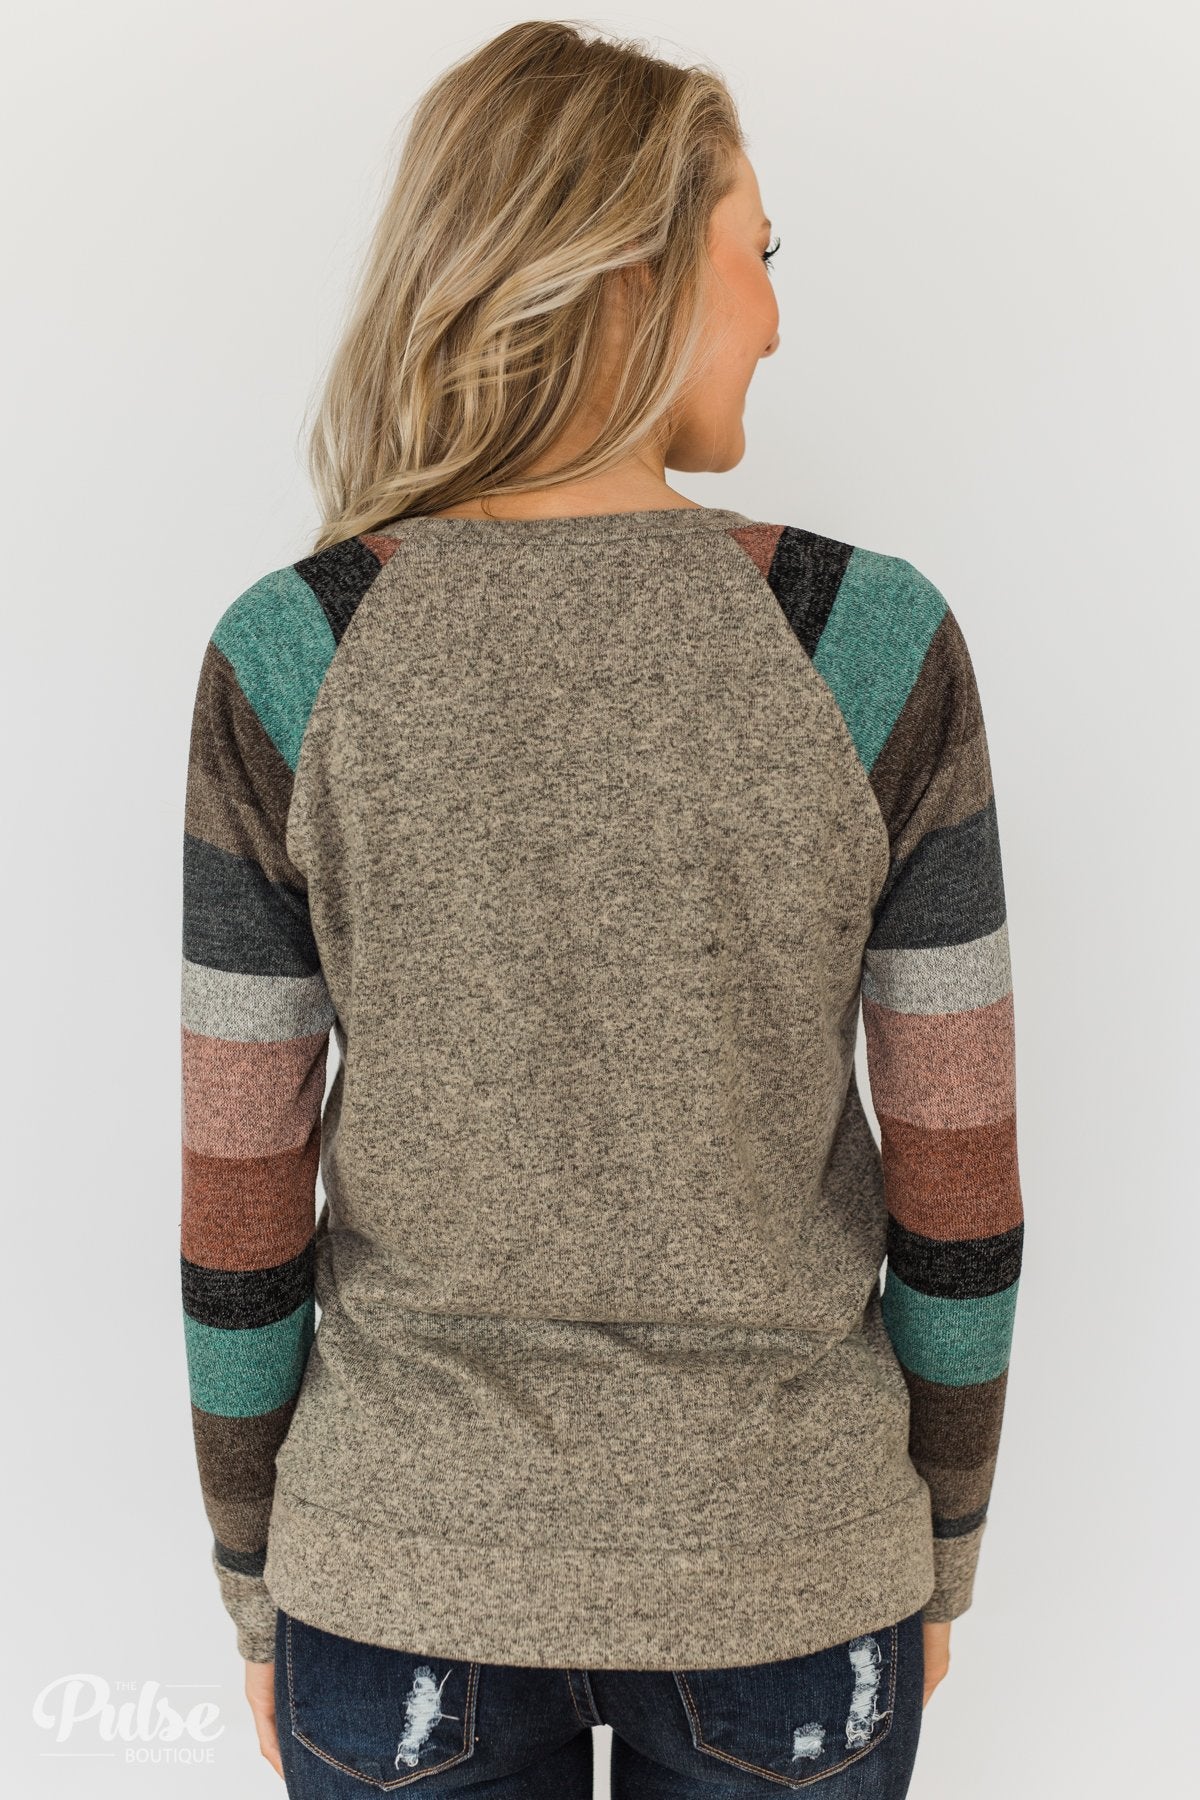 Look My Way Pullover Pocket Top- Taupe